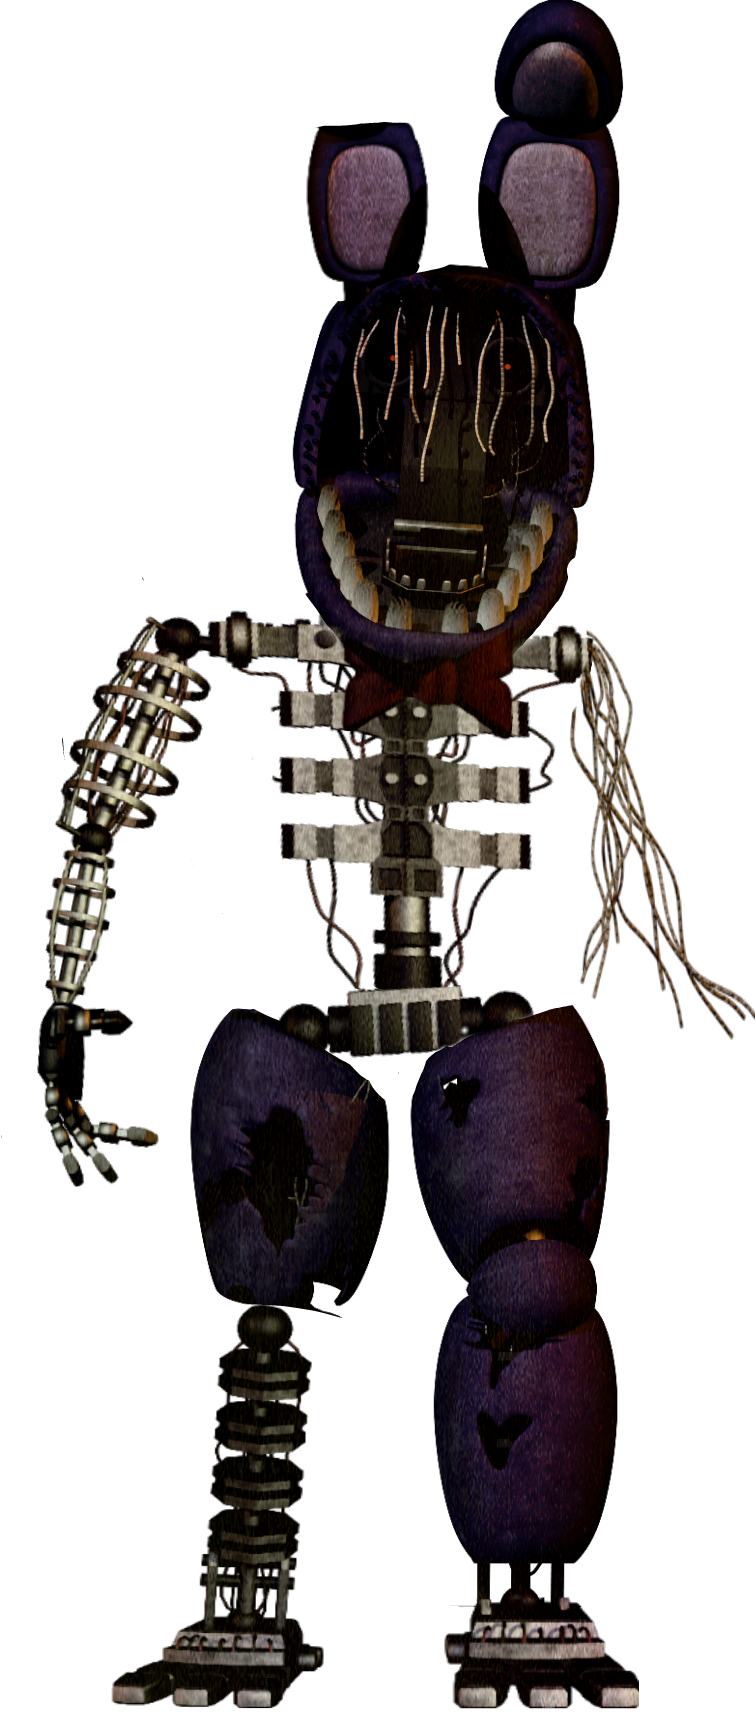 Freetoedit Ignited Bonnie Image By Vexinglistspringtrap